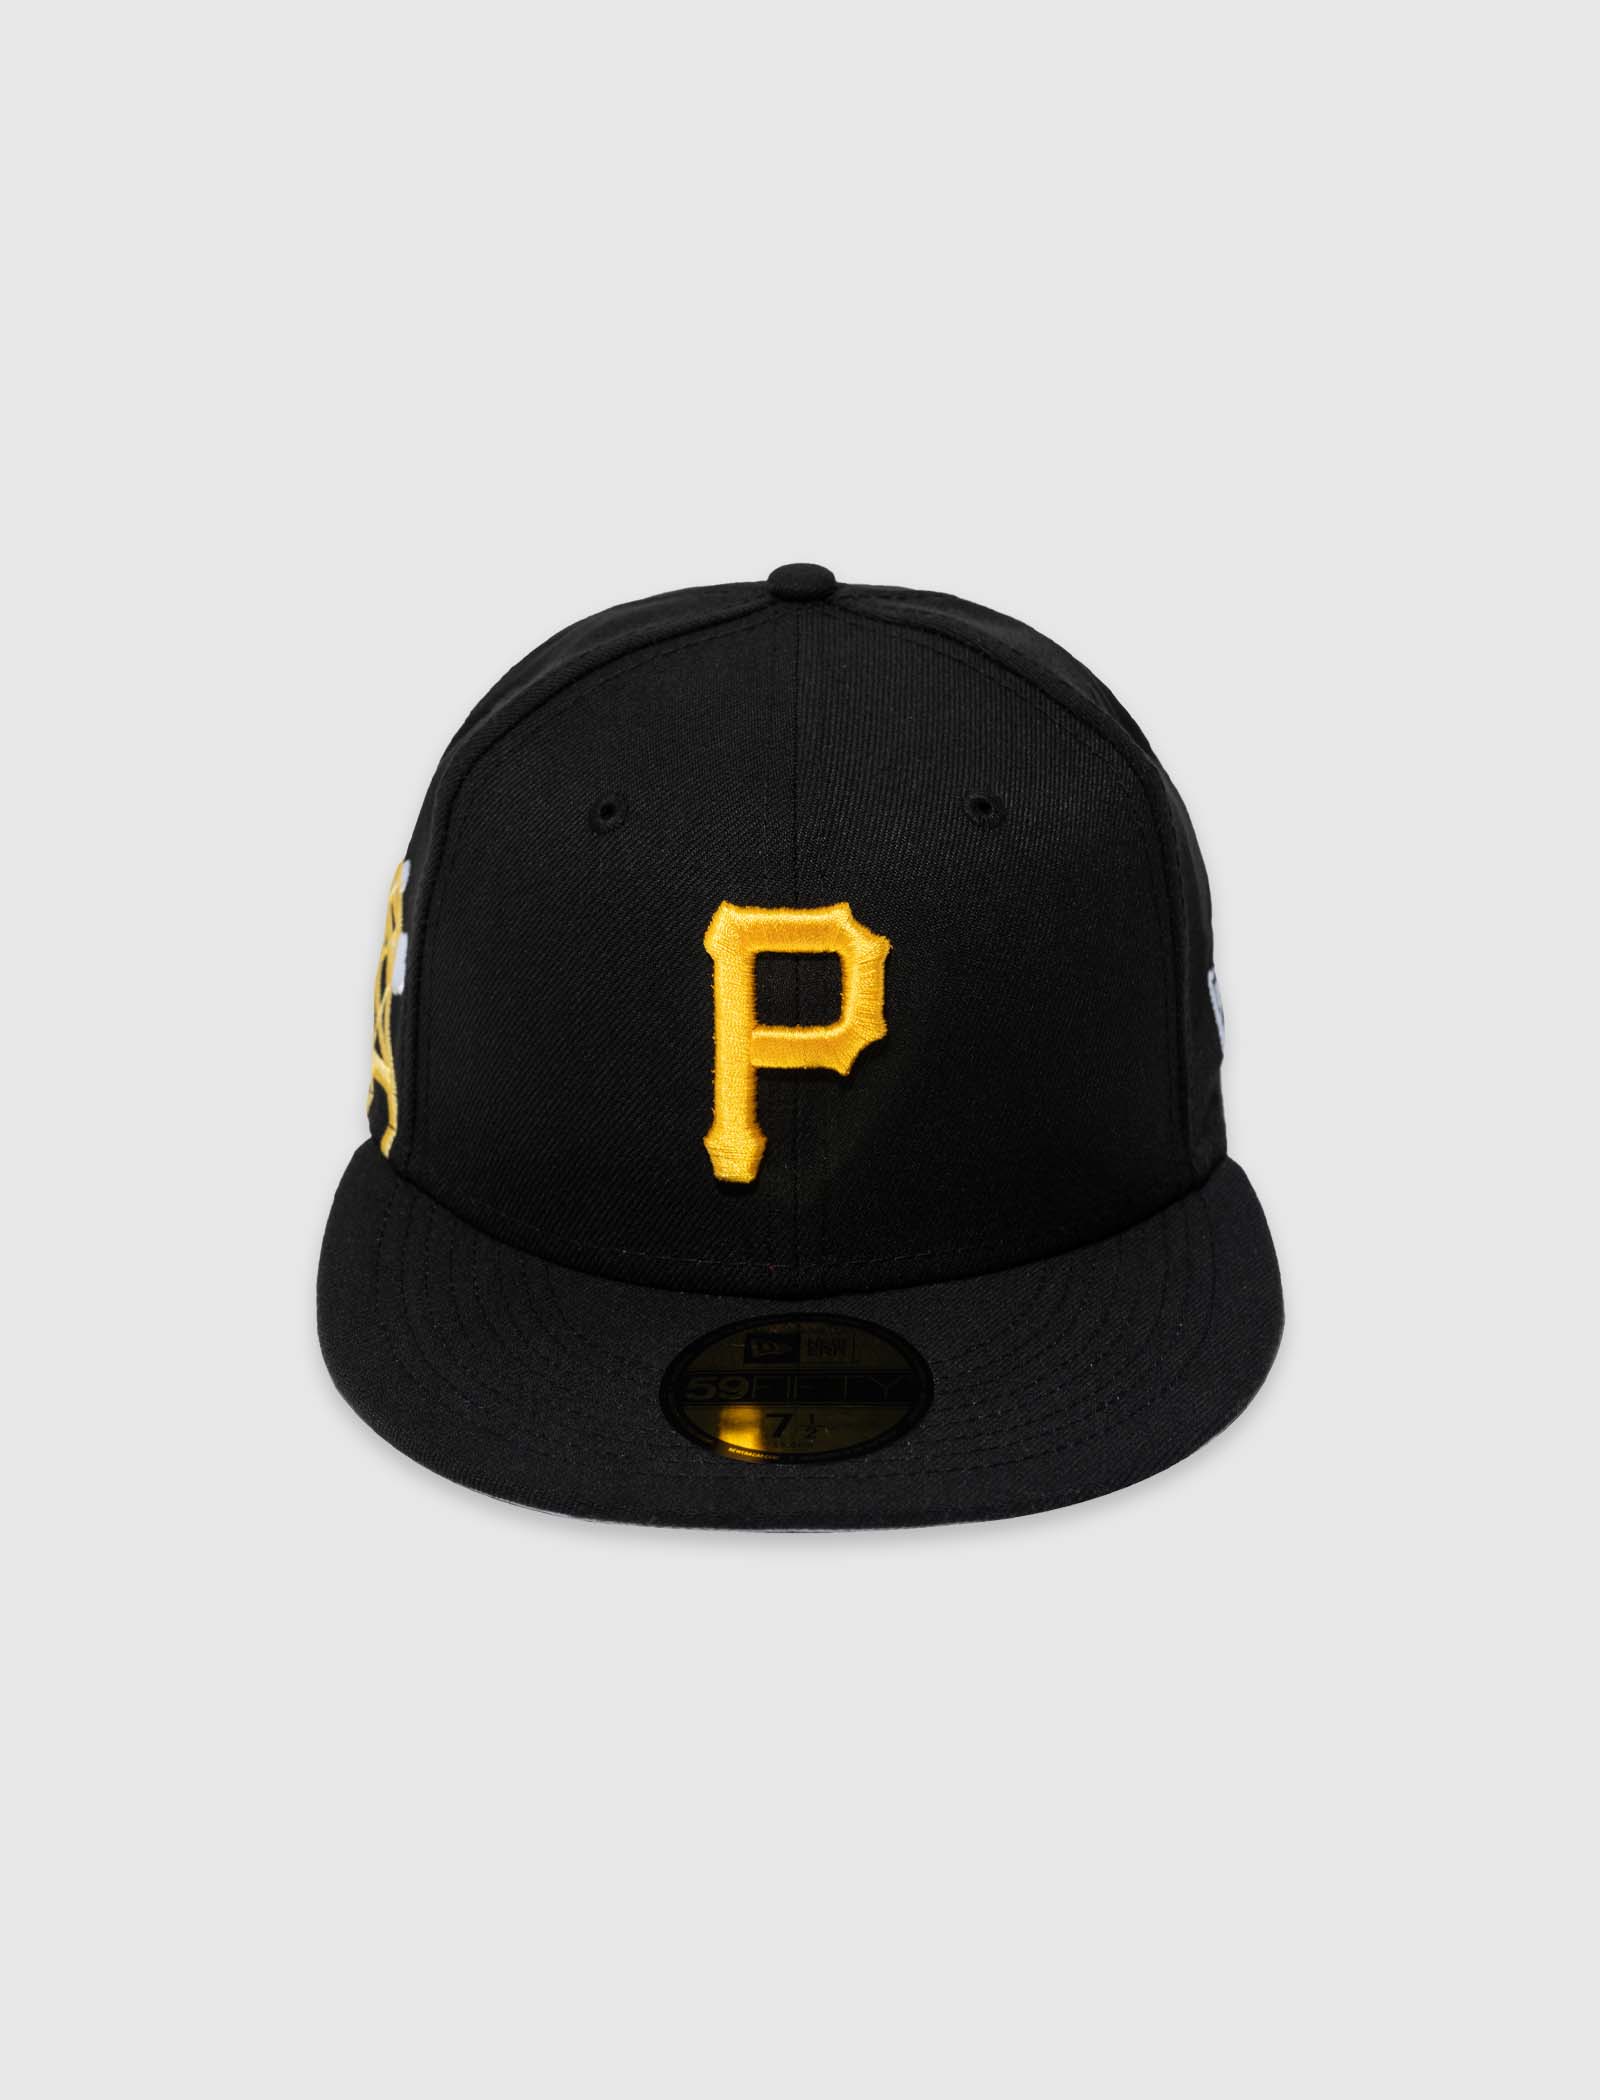 PITTSBURGH PIRATES CLOUD ICON 59FIFTY FITTED CAP